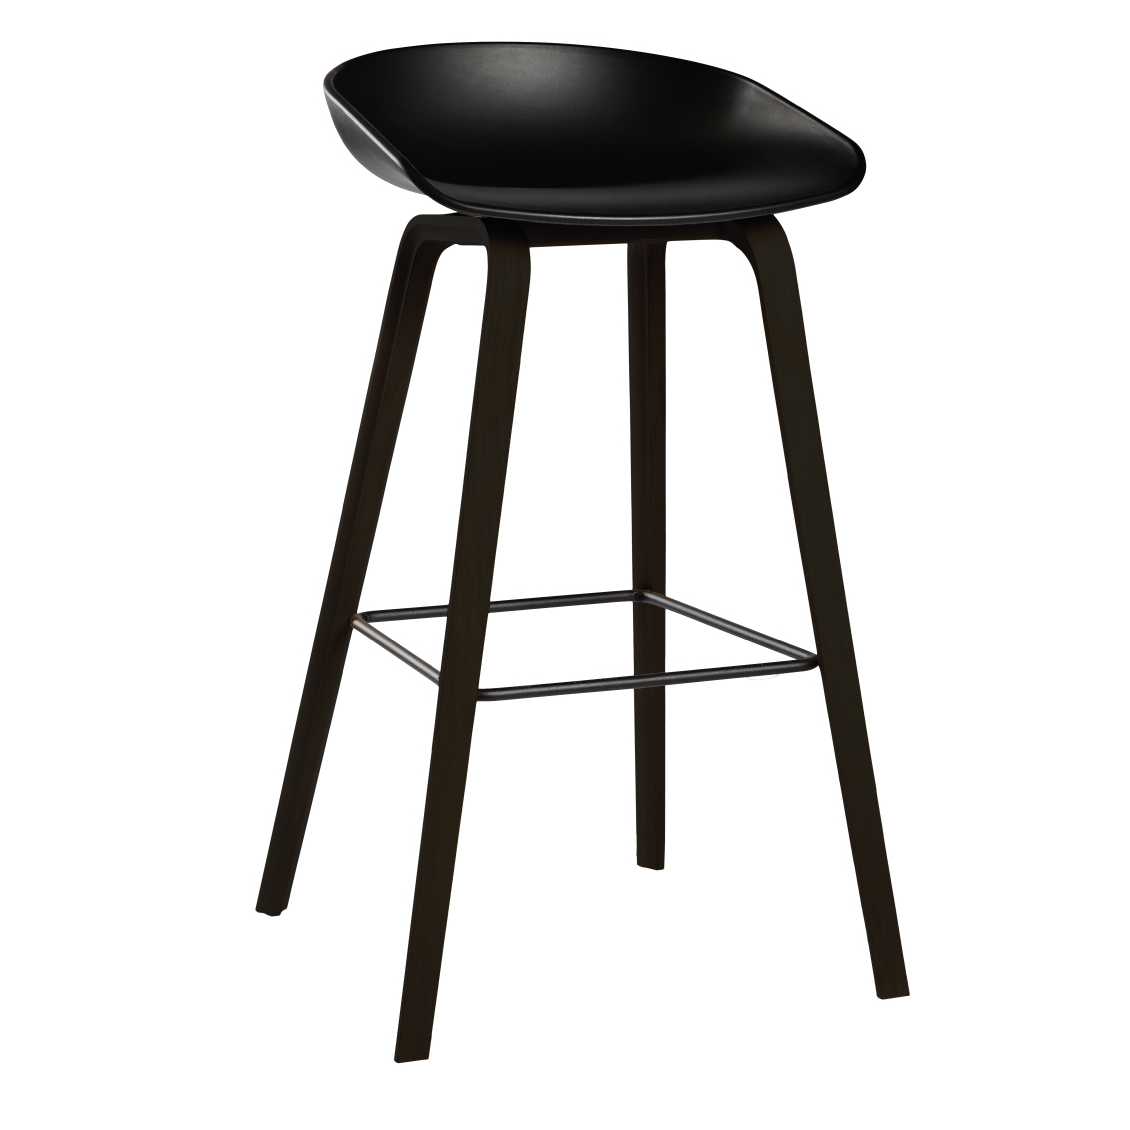 HAY - About A Stool AAS32 Black Base - Barkruk - The SHOP Online Herentals